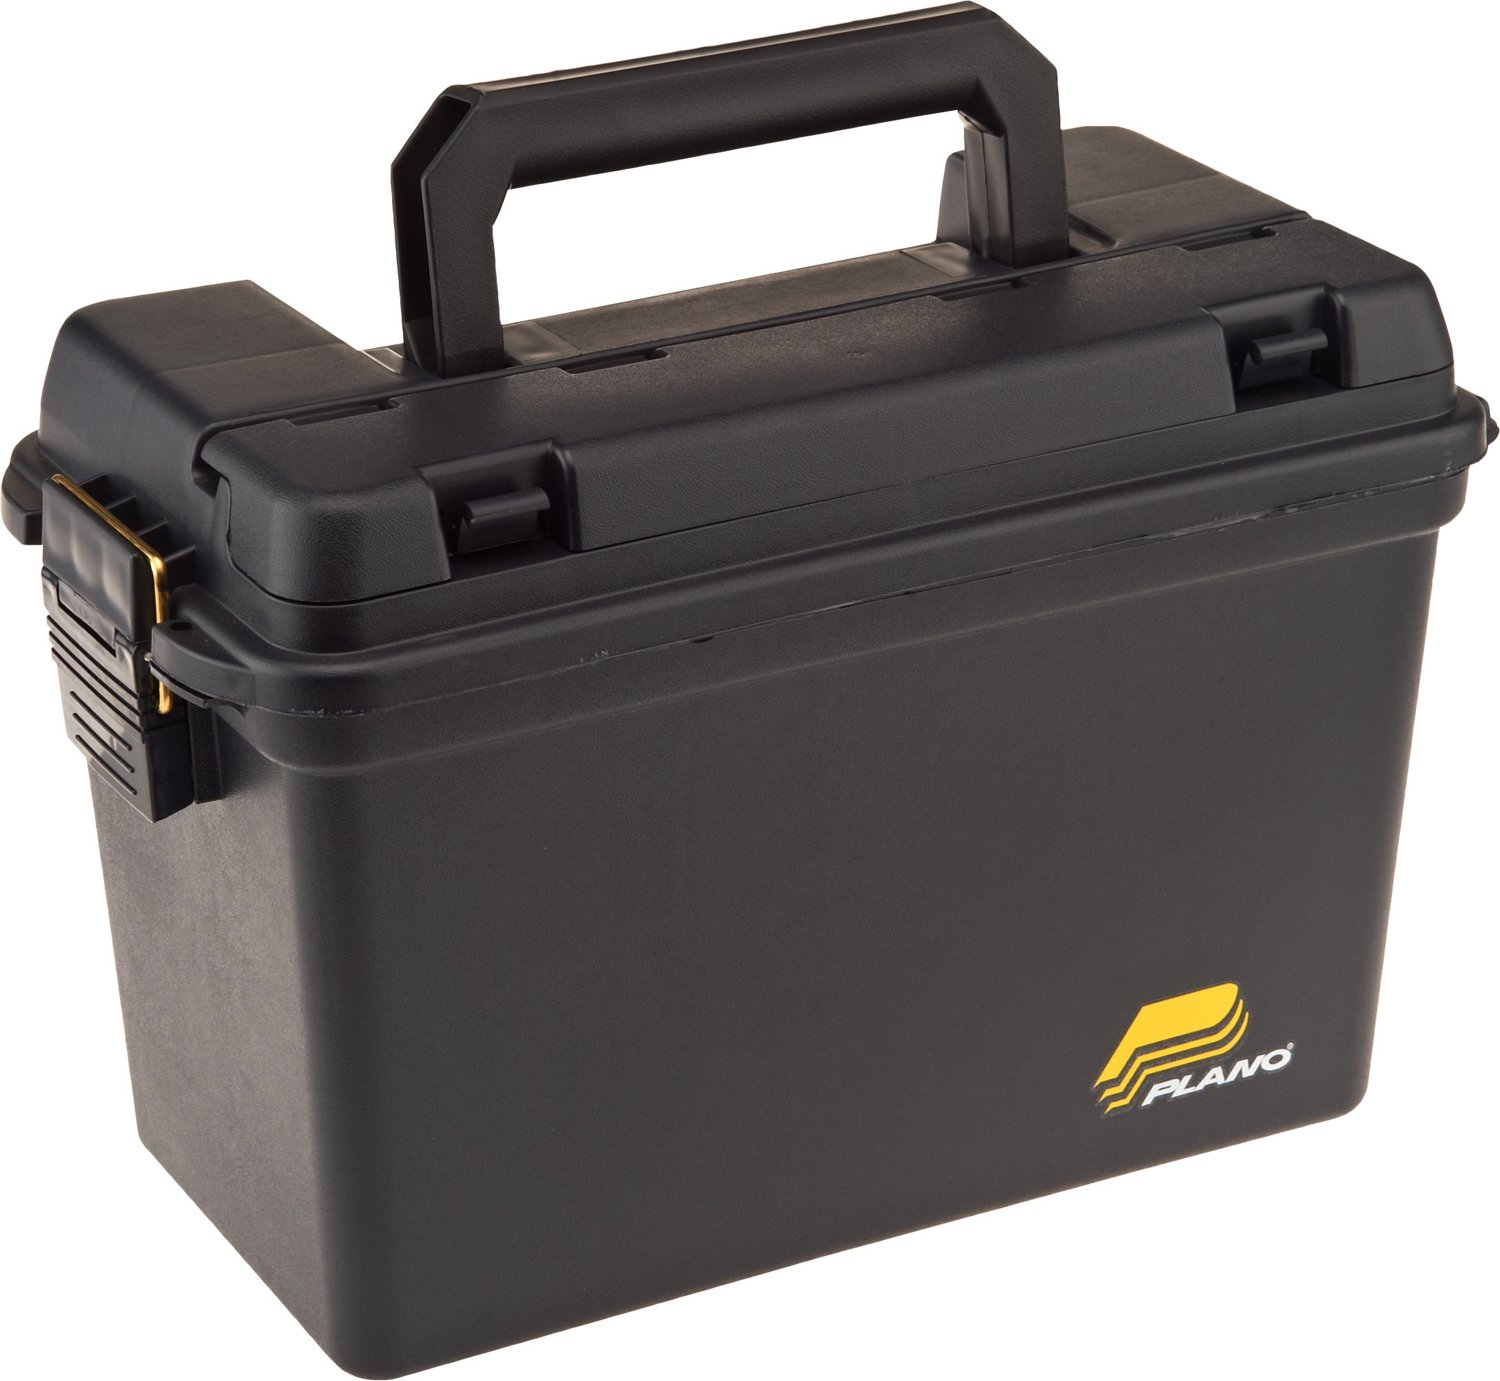 Plano Molding Deep Field Ammo Case 1612-98, Black, 15in, w/o tray or gasket - $9.99 + shipping at Academy Sports